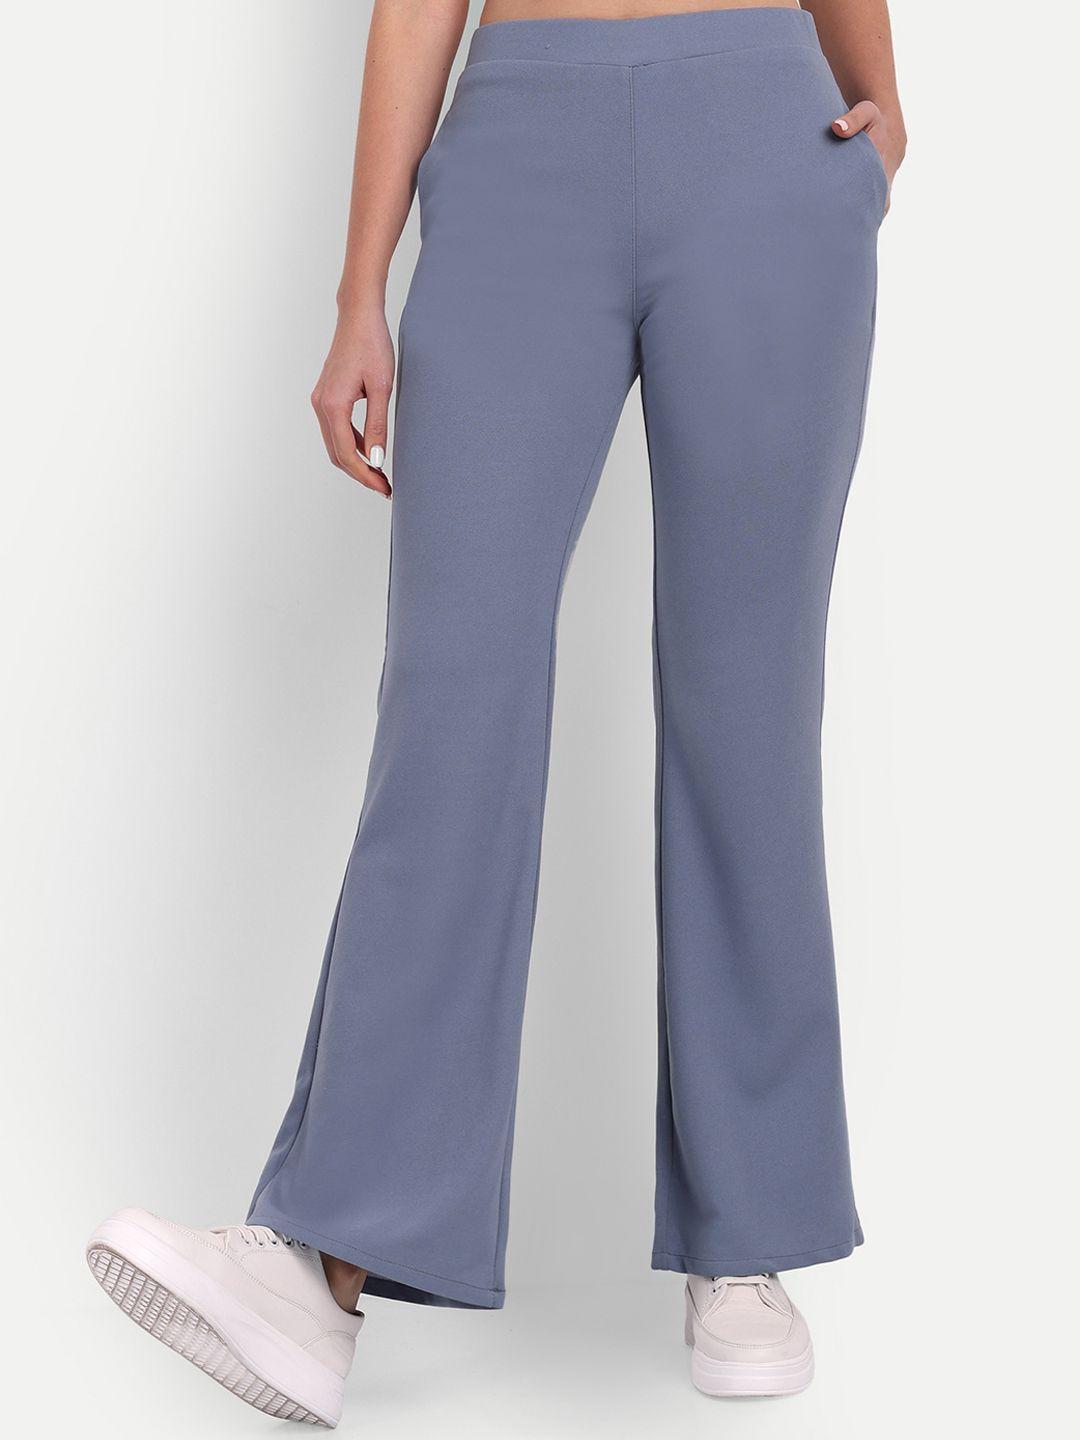 next-one-women-relaxed-flared-high-rise-non-iron-trousers